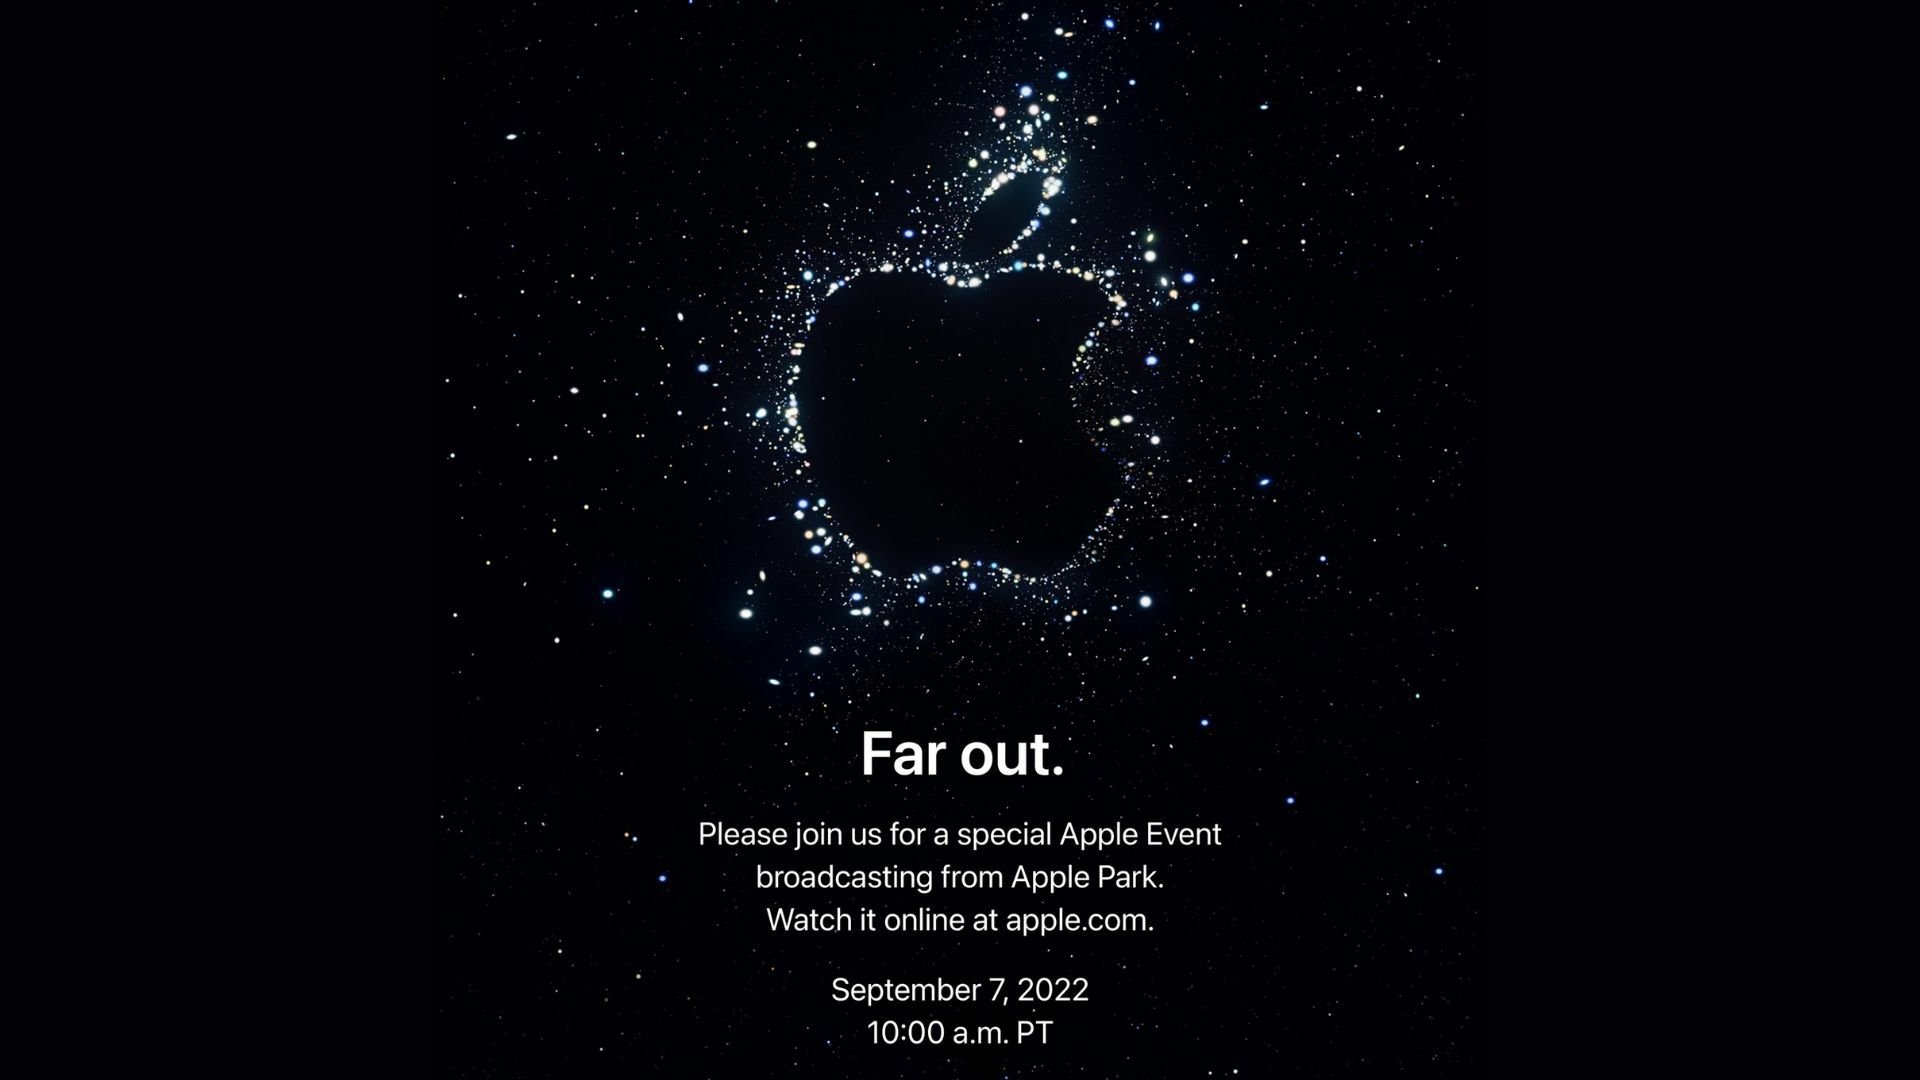 Apple invite for 2022 iPhone 14 launch event on Sept. 7